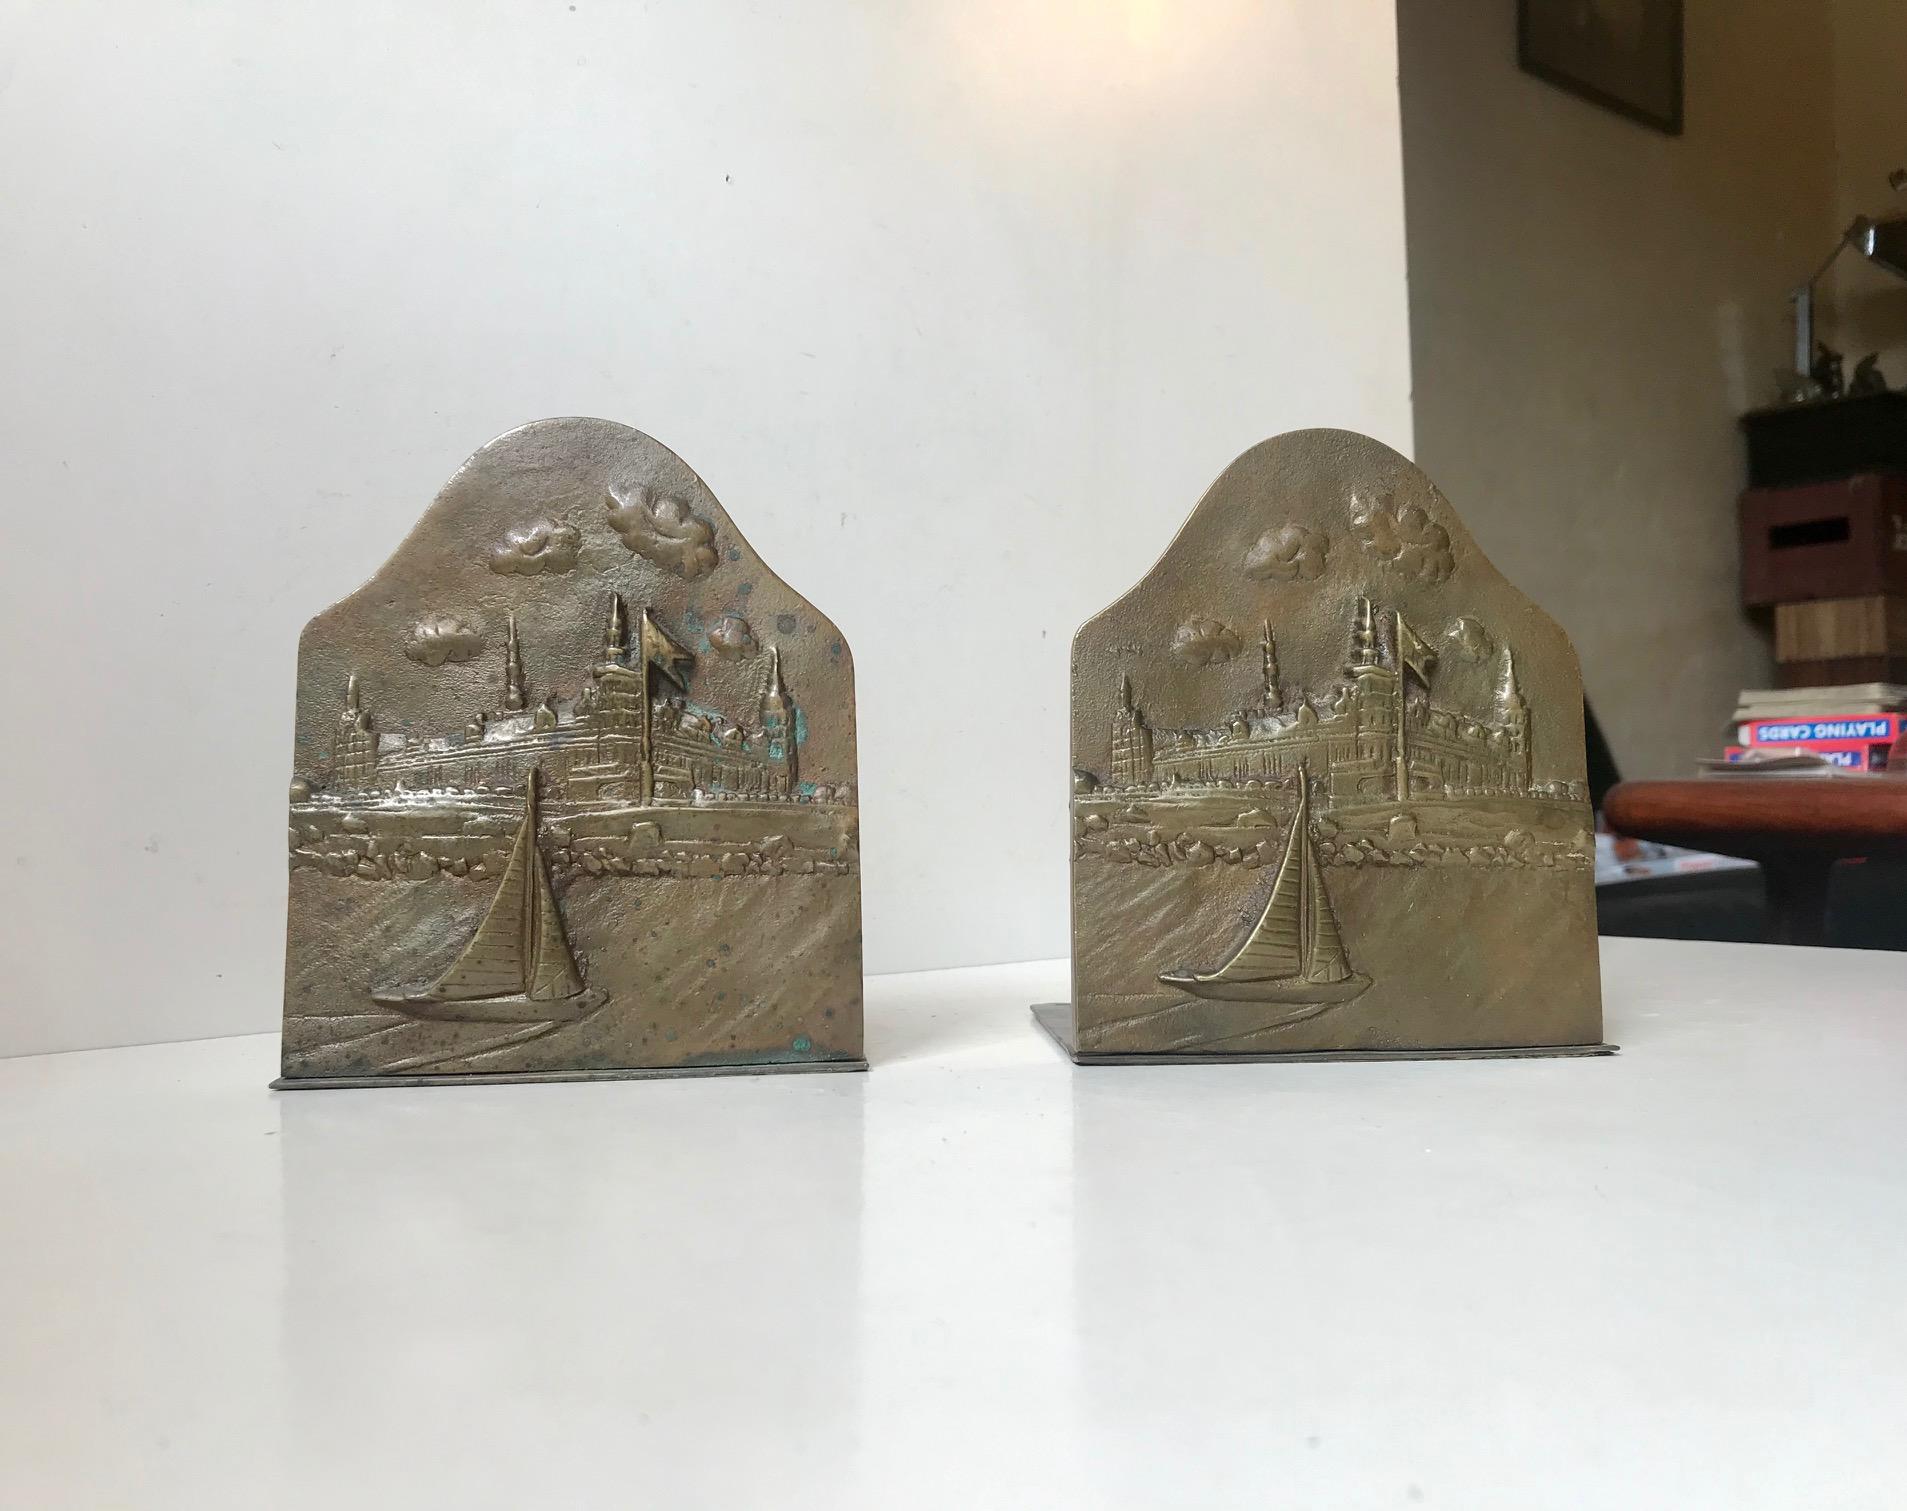 A pair of solid bronze bookends. Designed and manufactured by Ægte Klokke Bronze in Denmark during the 1920s or 1930s. The bookends features a relief image of Kronborg Castle in Denmark seen from the Sea. Kronborg was the setting of Shakespeares